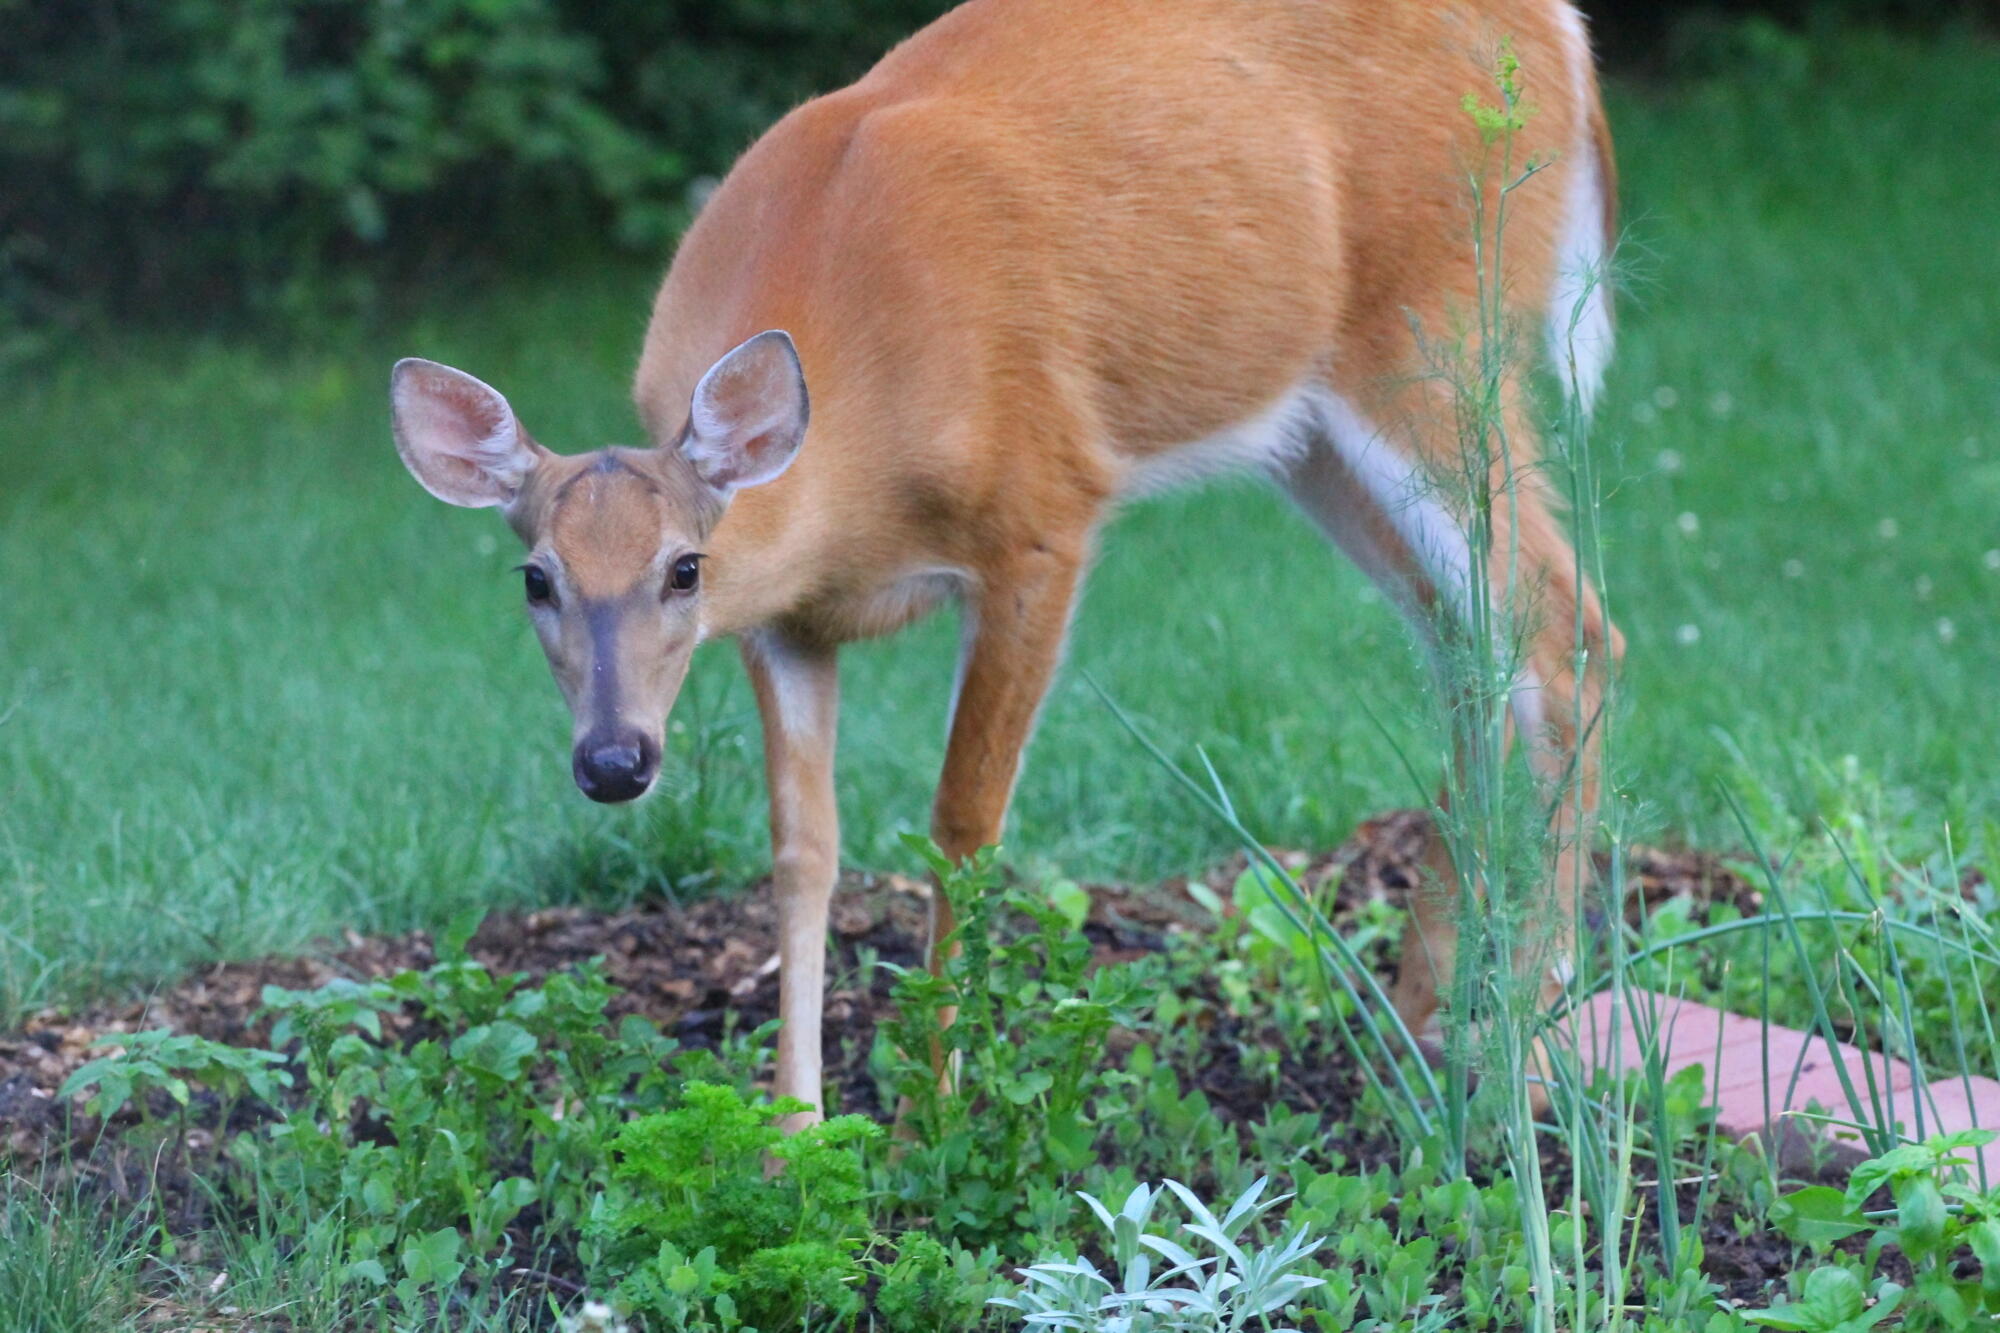 A deer is standing in a grassy yard.